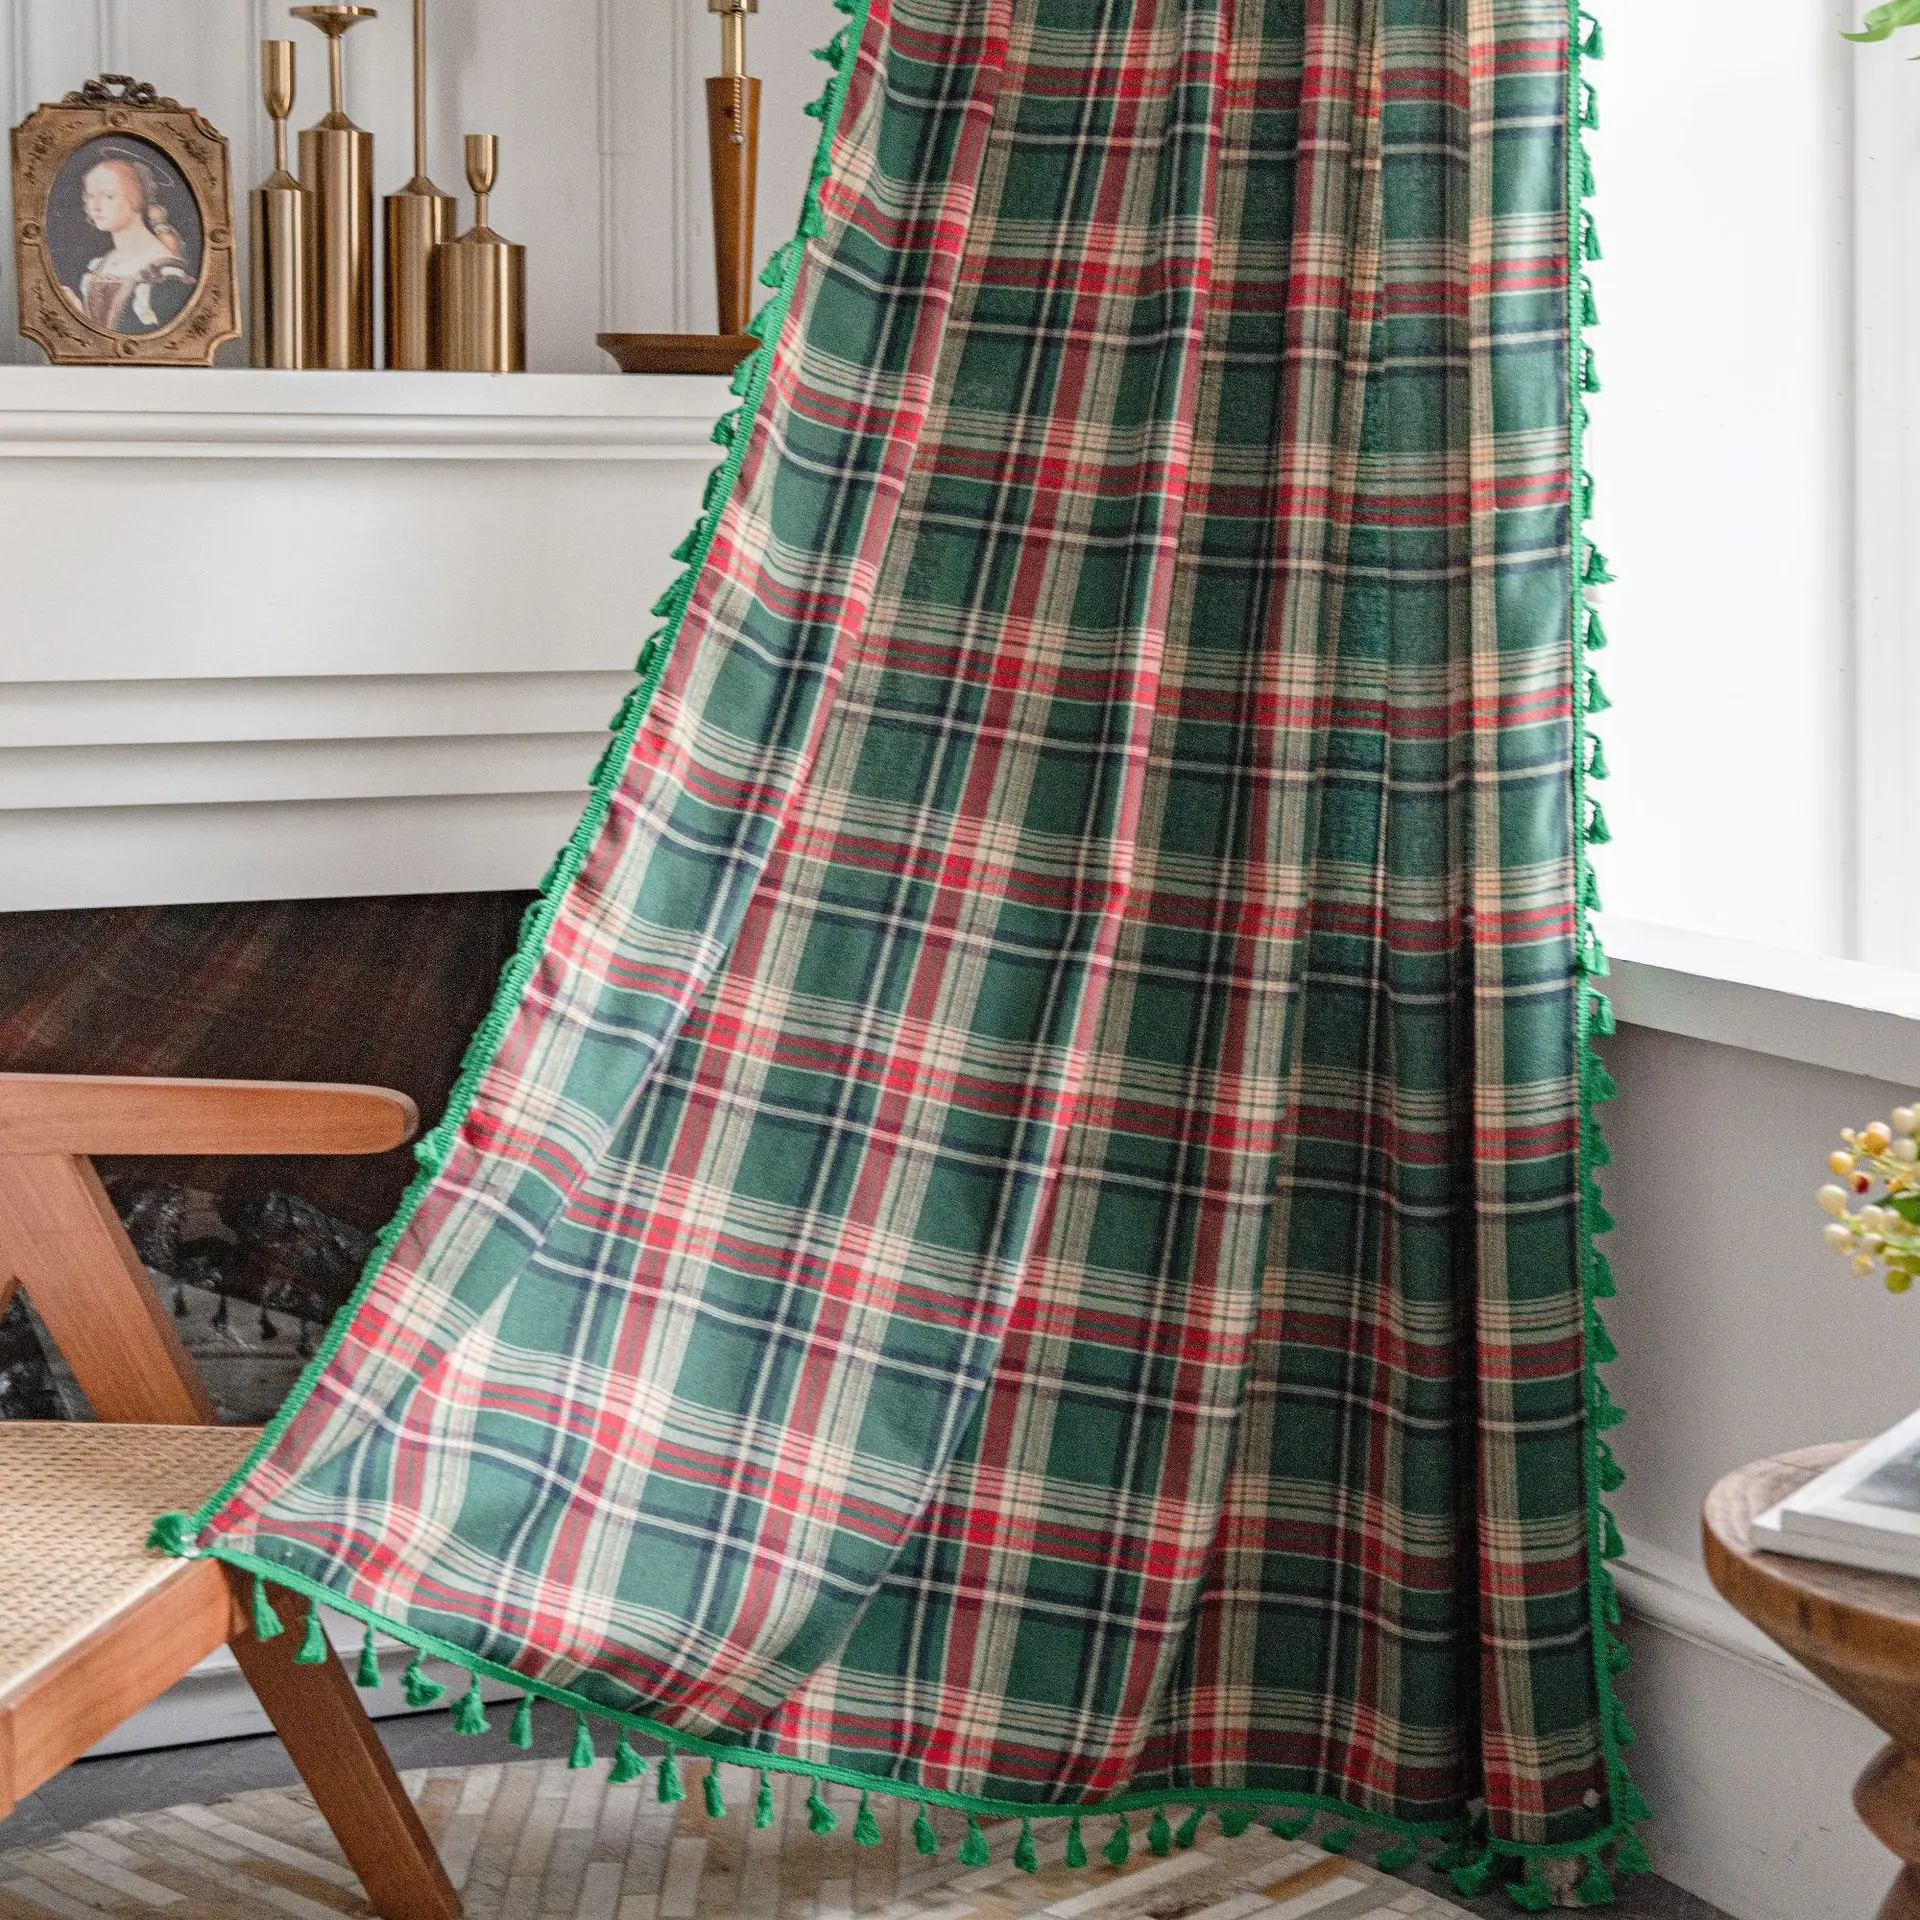 

Bay Window Curtain Semi-shading for Kitchen Living Room Bedroom Home Decoration Curtain American Plaid Yarn-dyed Cotton Linen